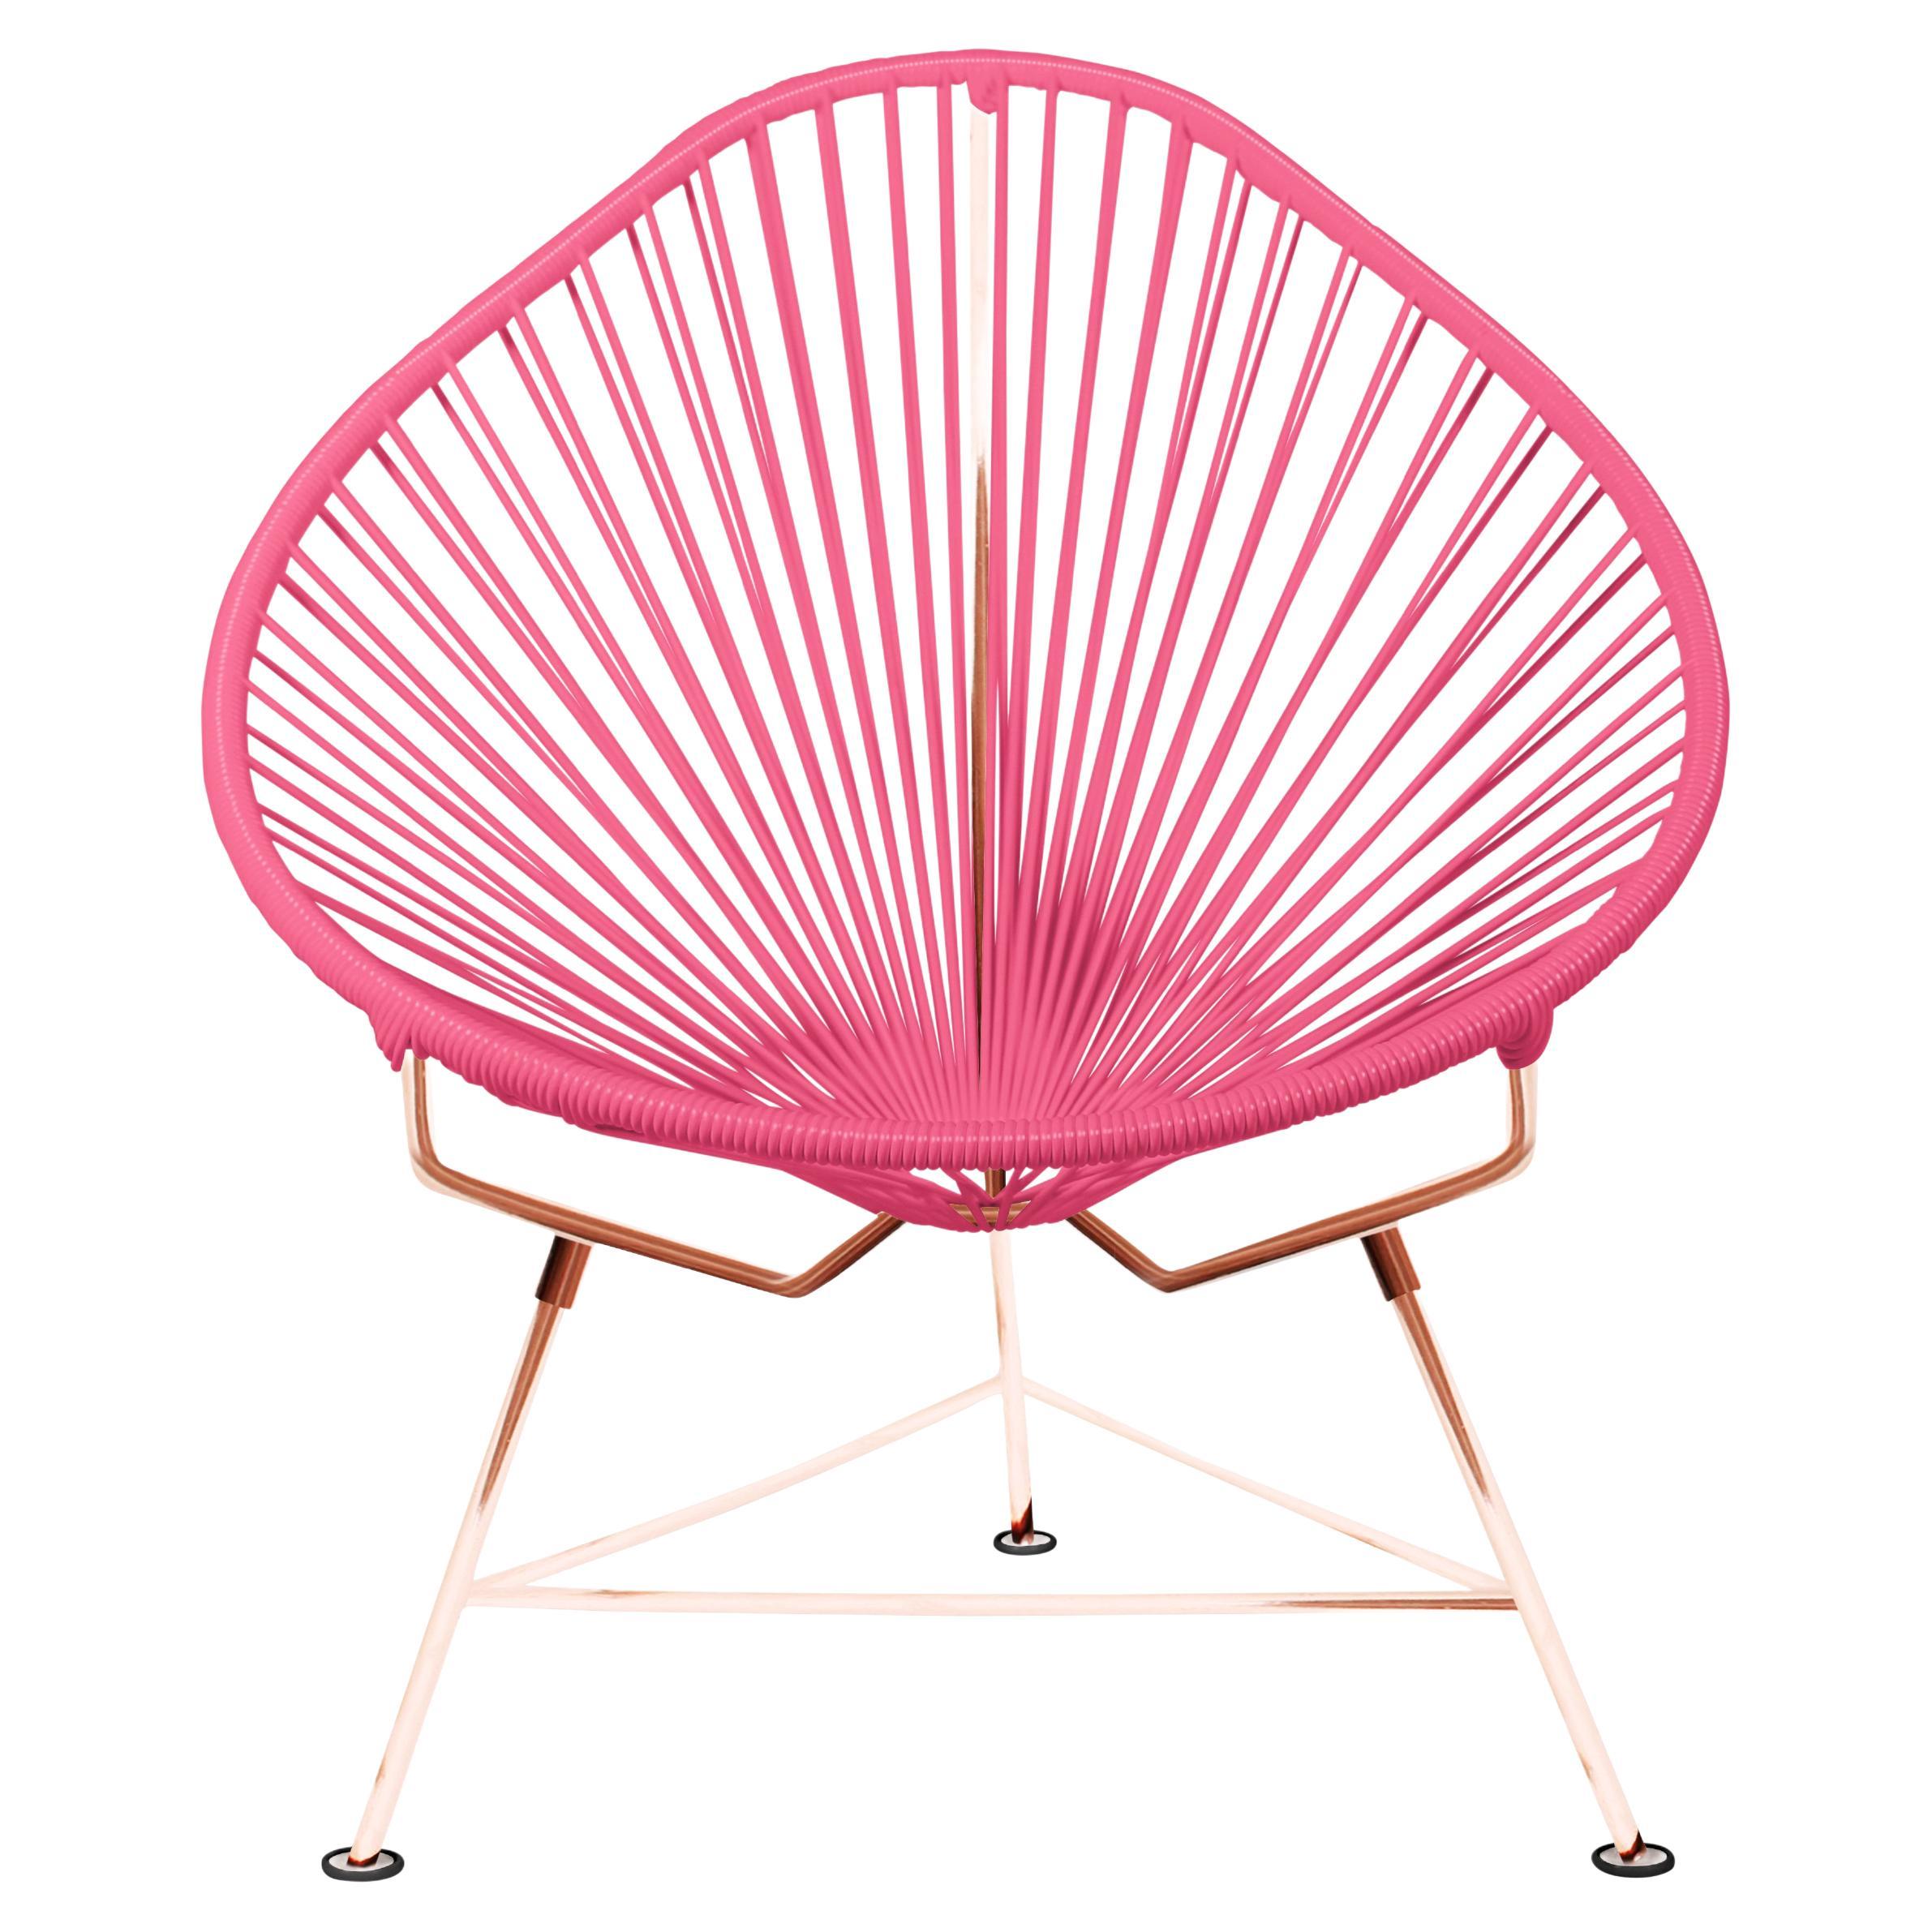 Innit Designs Acapulco Chair Pink Weave on Copper Frame For Sale